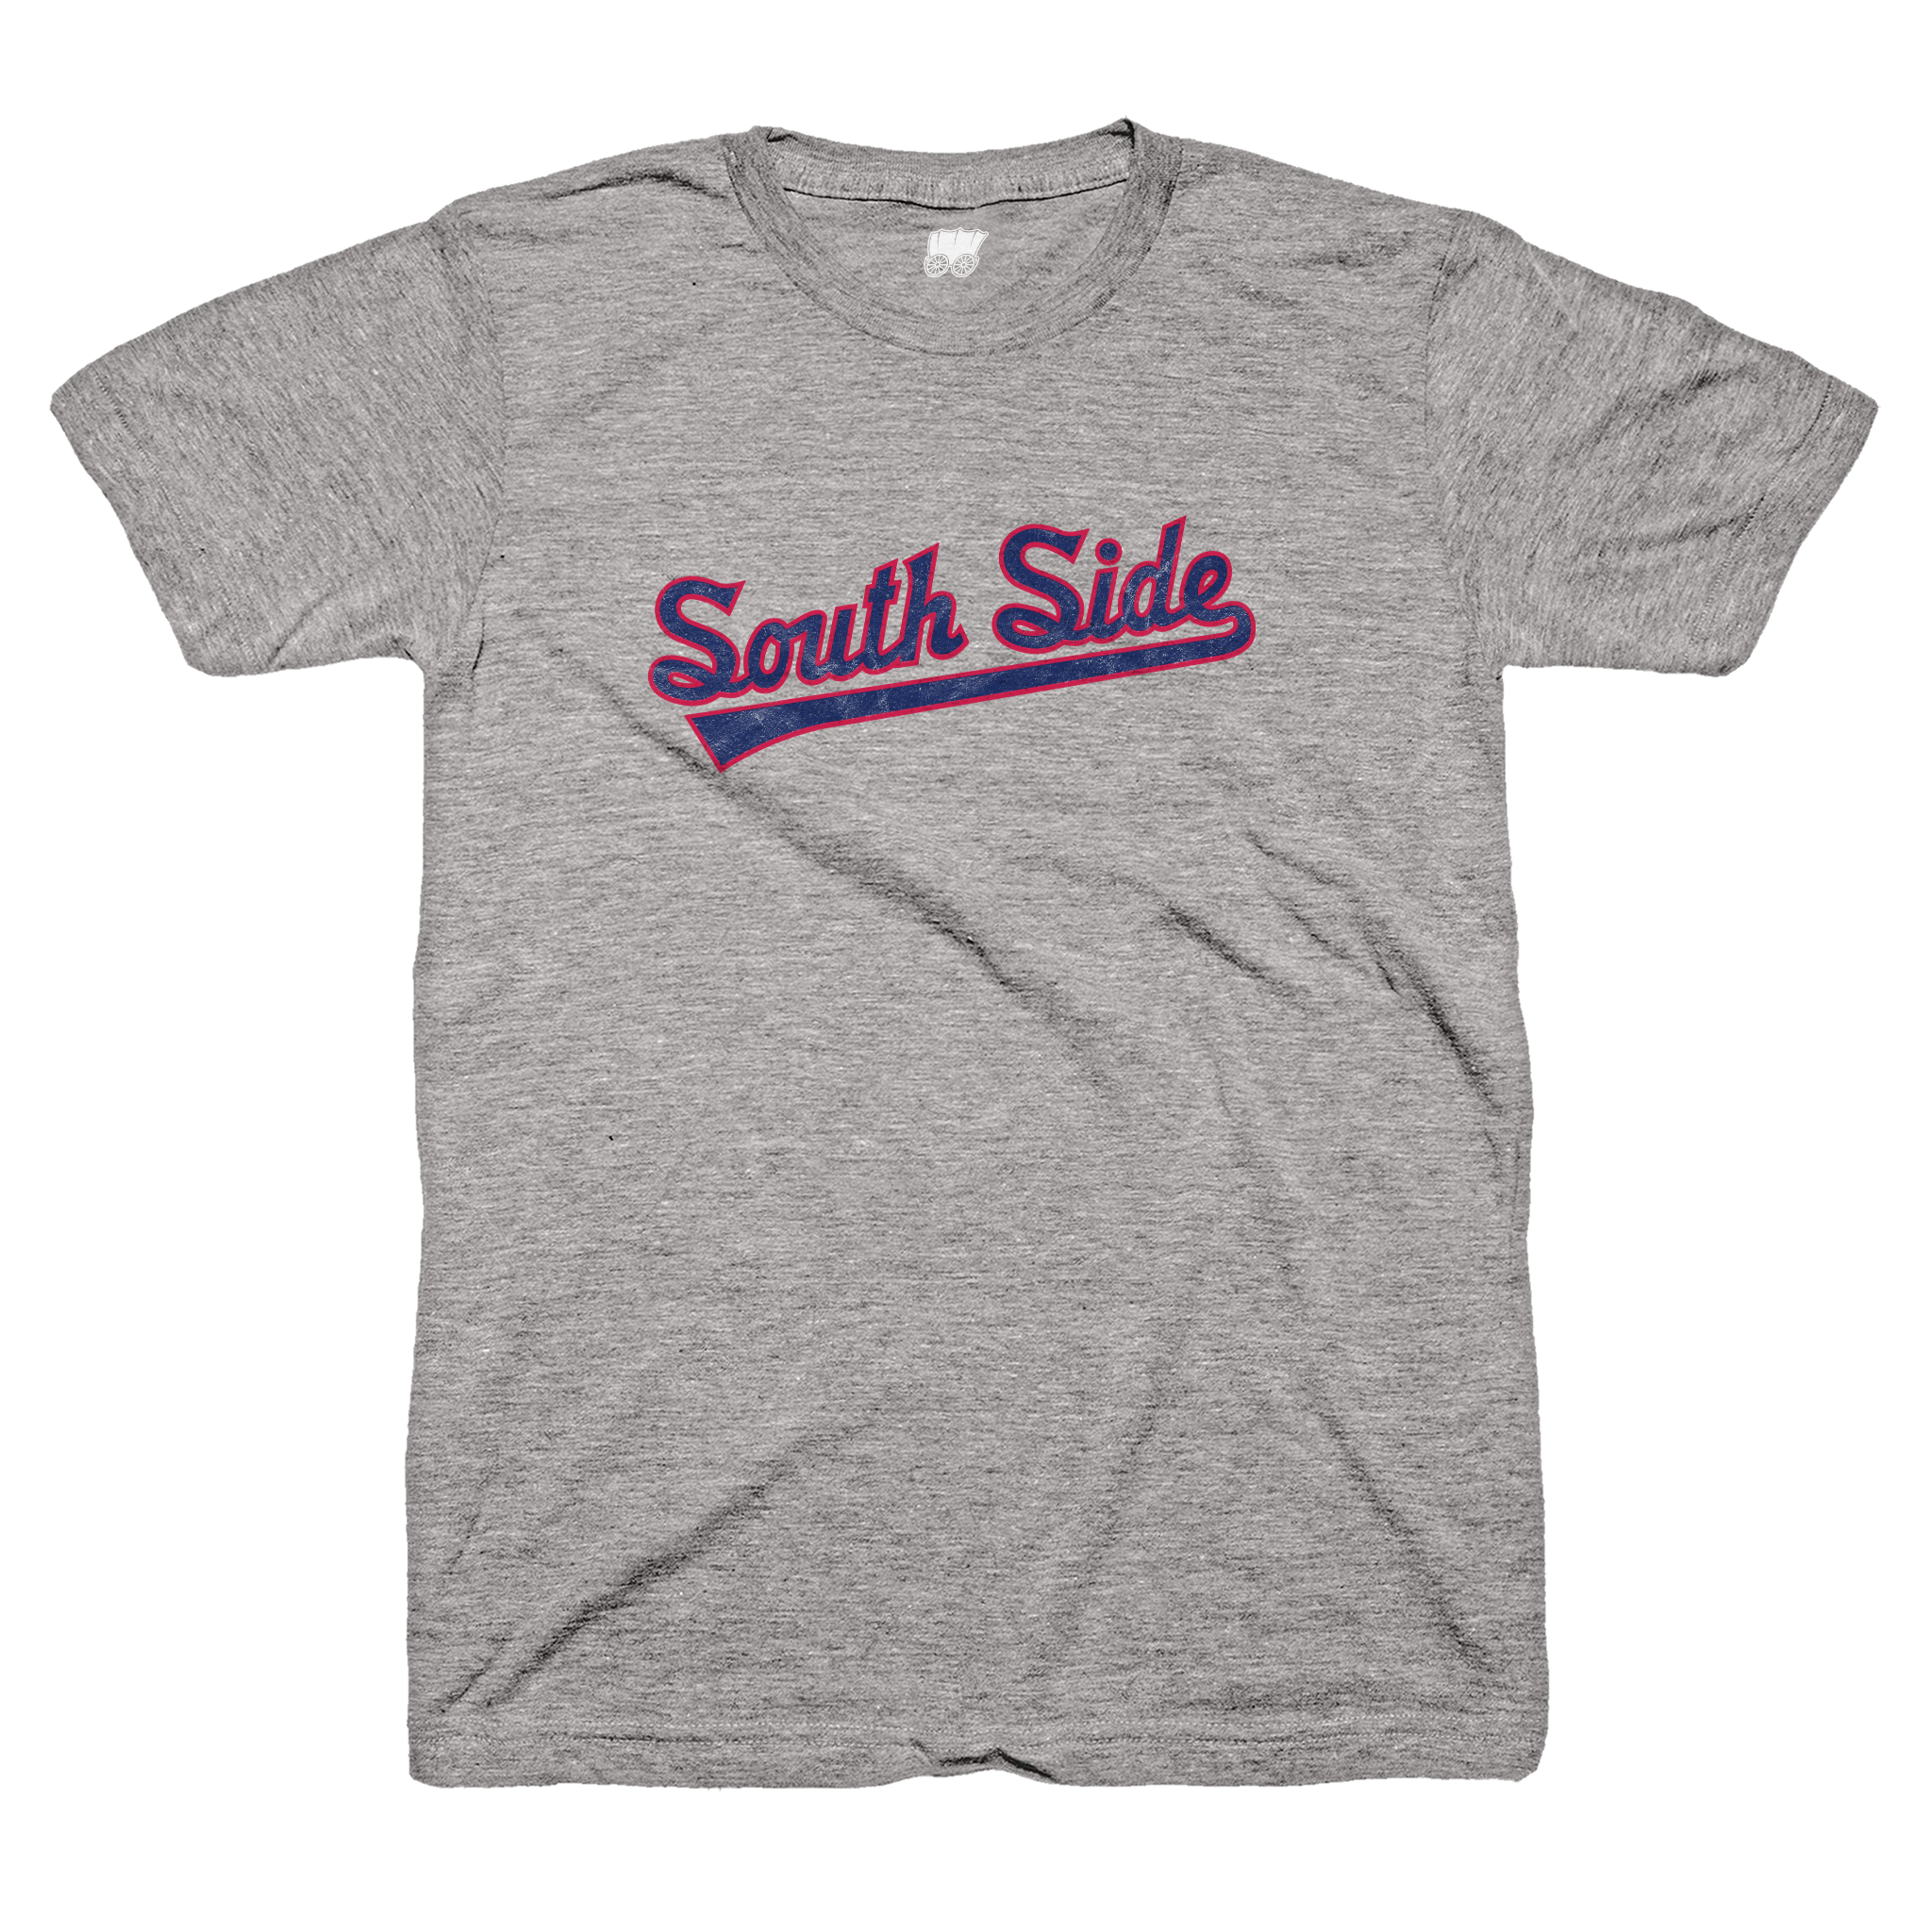 35th and Shields gear, South Side Chicago tshirt